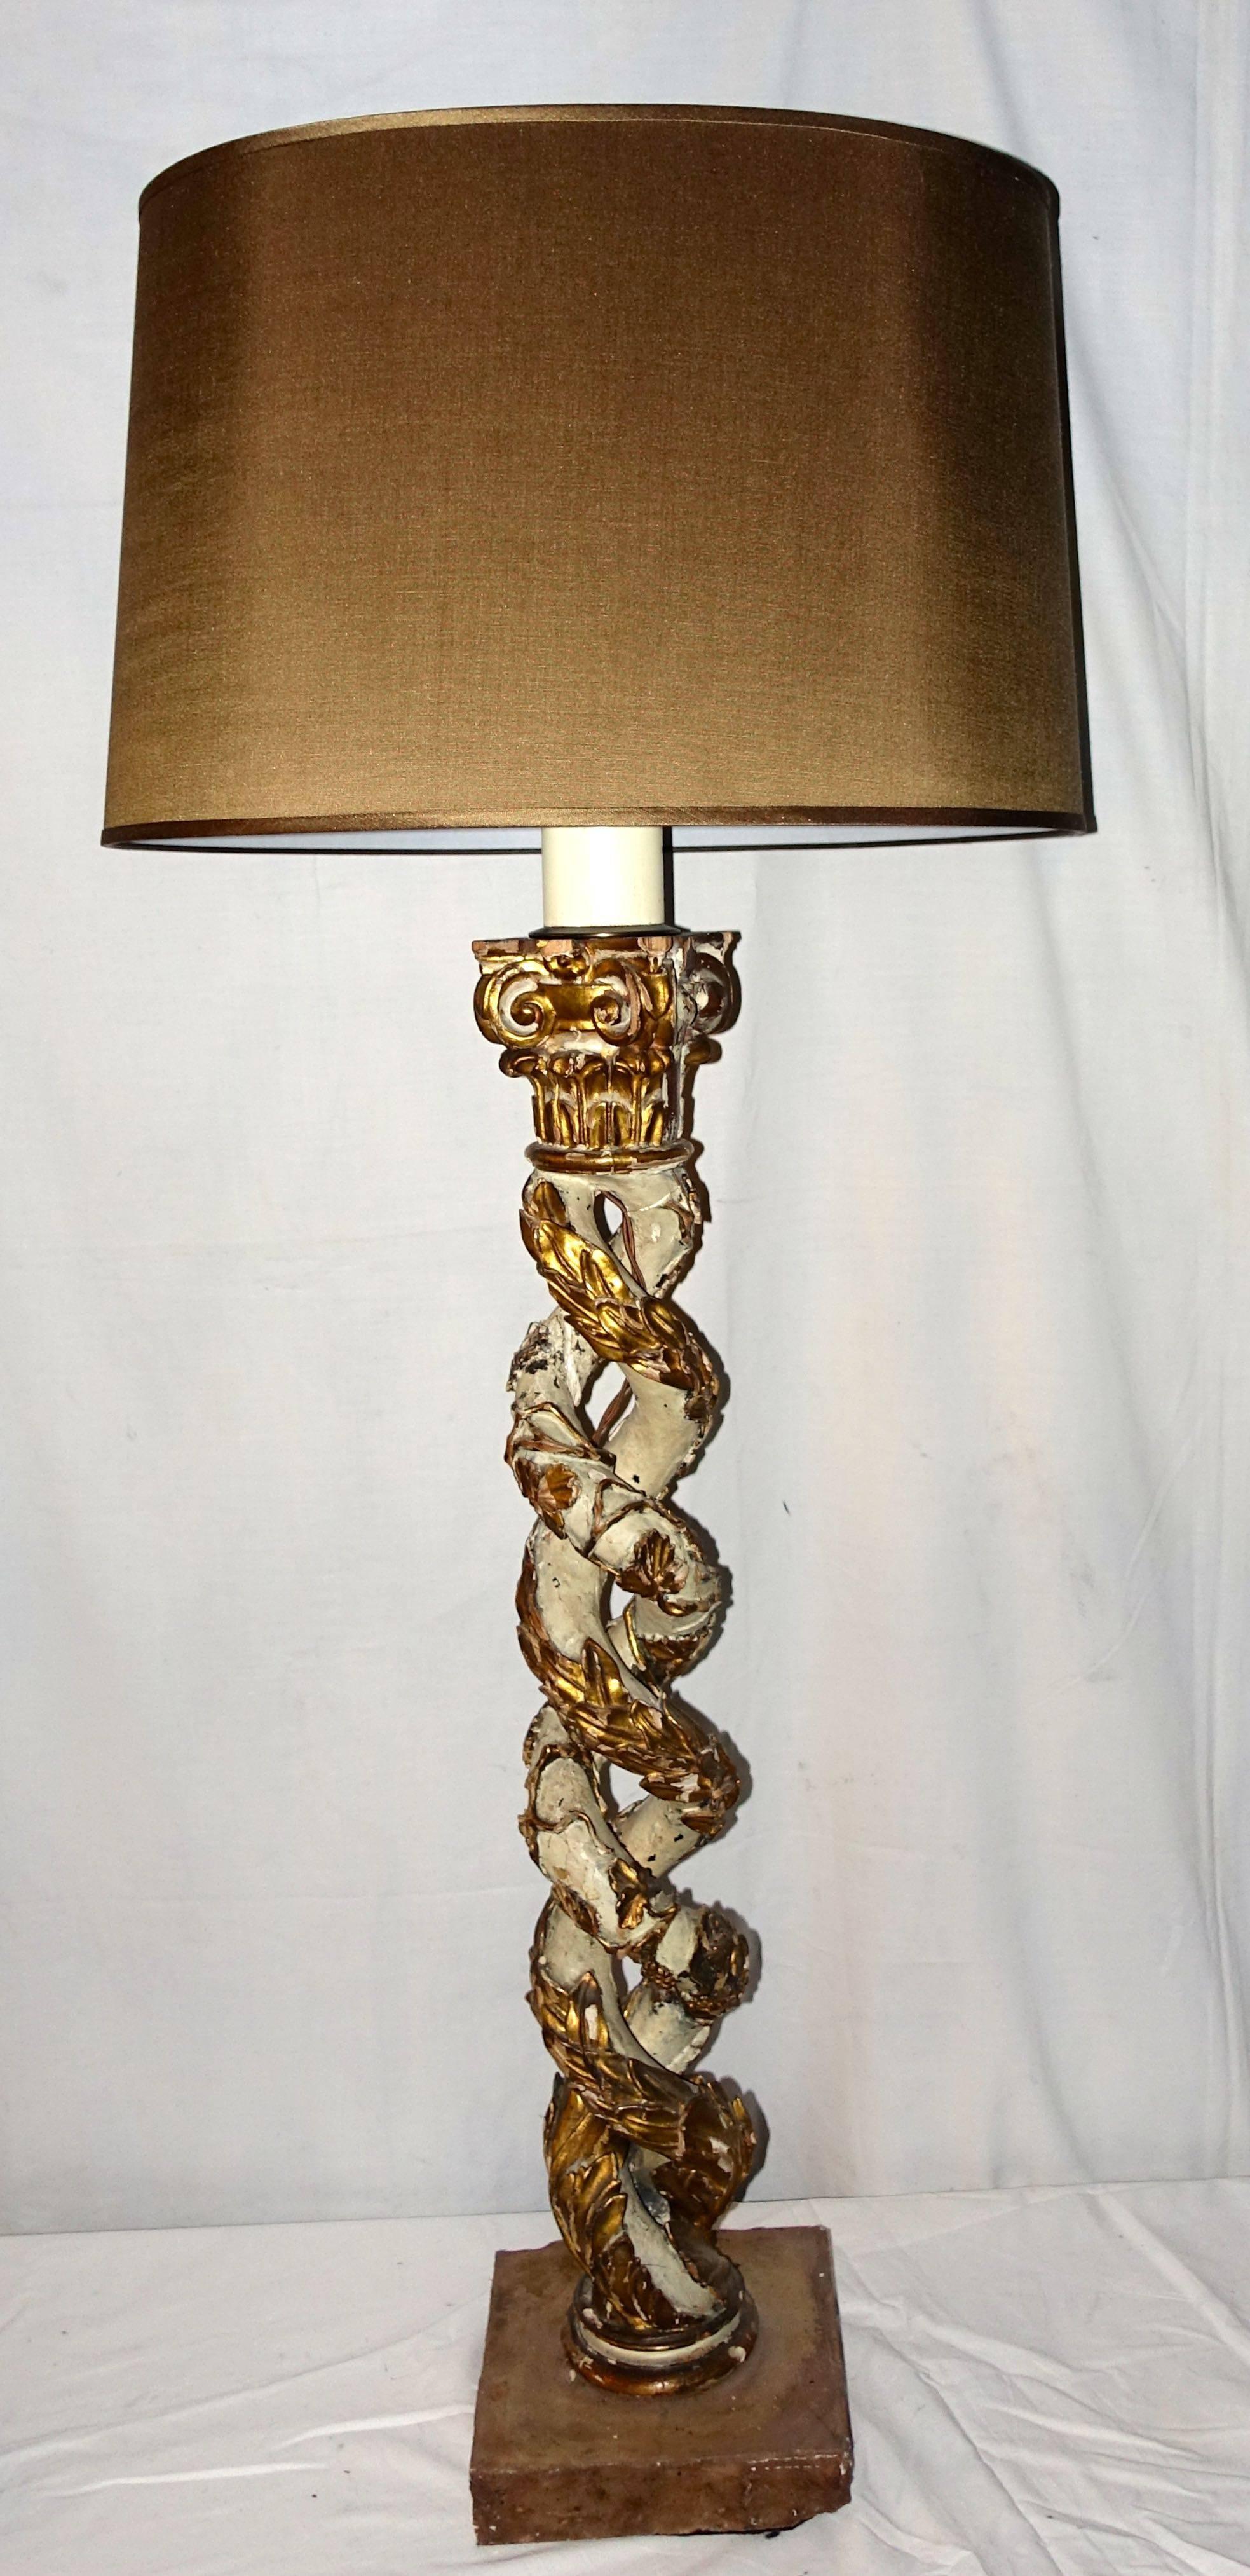 Decorative twisted, carved wood columns with gold gilt capitals originally found on cathedral altar.
Converted to a lamp with oval silk shade.
Newly rewired.
Measures:
Overall height is 47